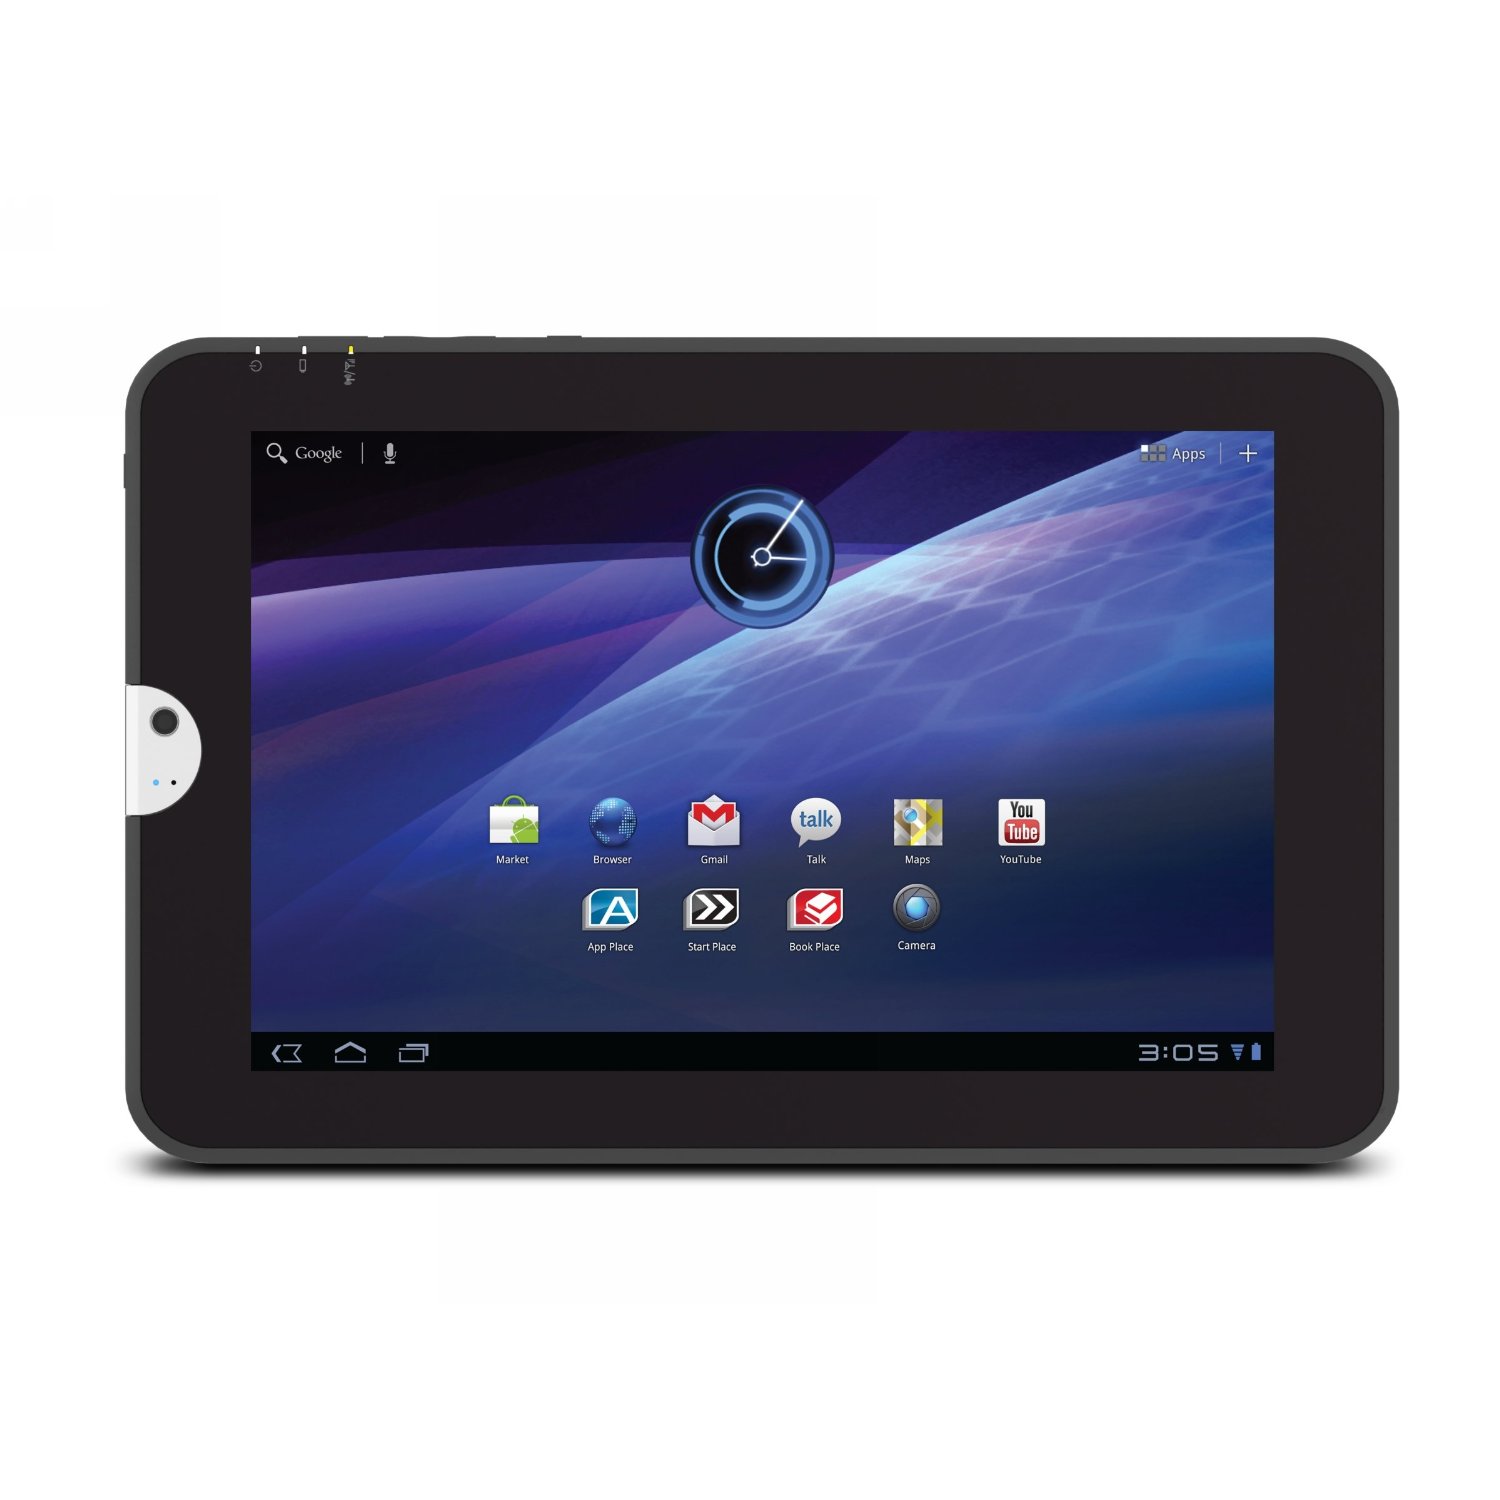 http://thetechjournal.com/wp-content/uploads/images/1107/1309837467-toshiba-thrive-wifi-tab-coming-to-best-buy-on-july-10th-2.jpg